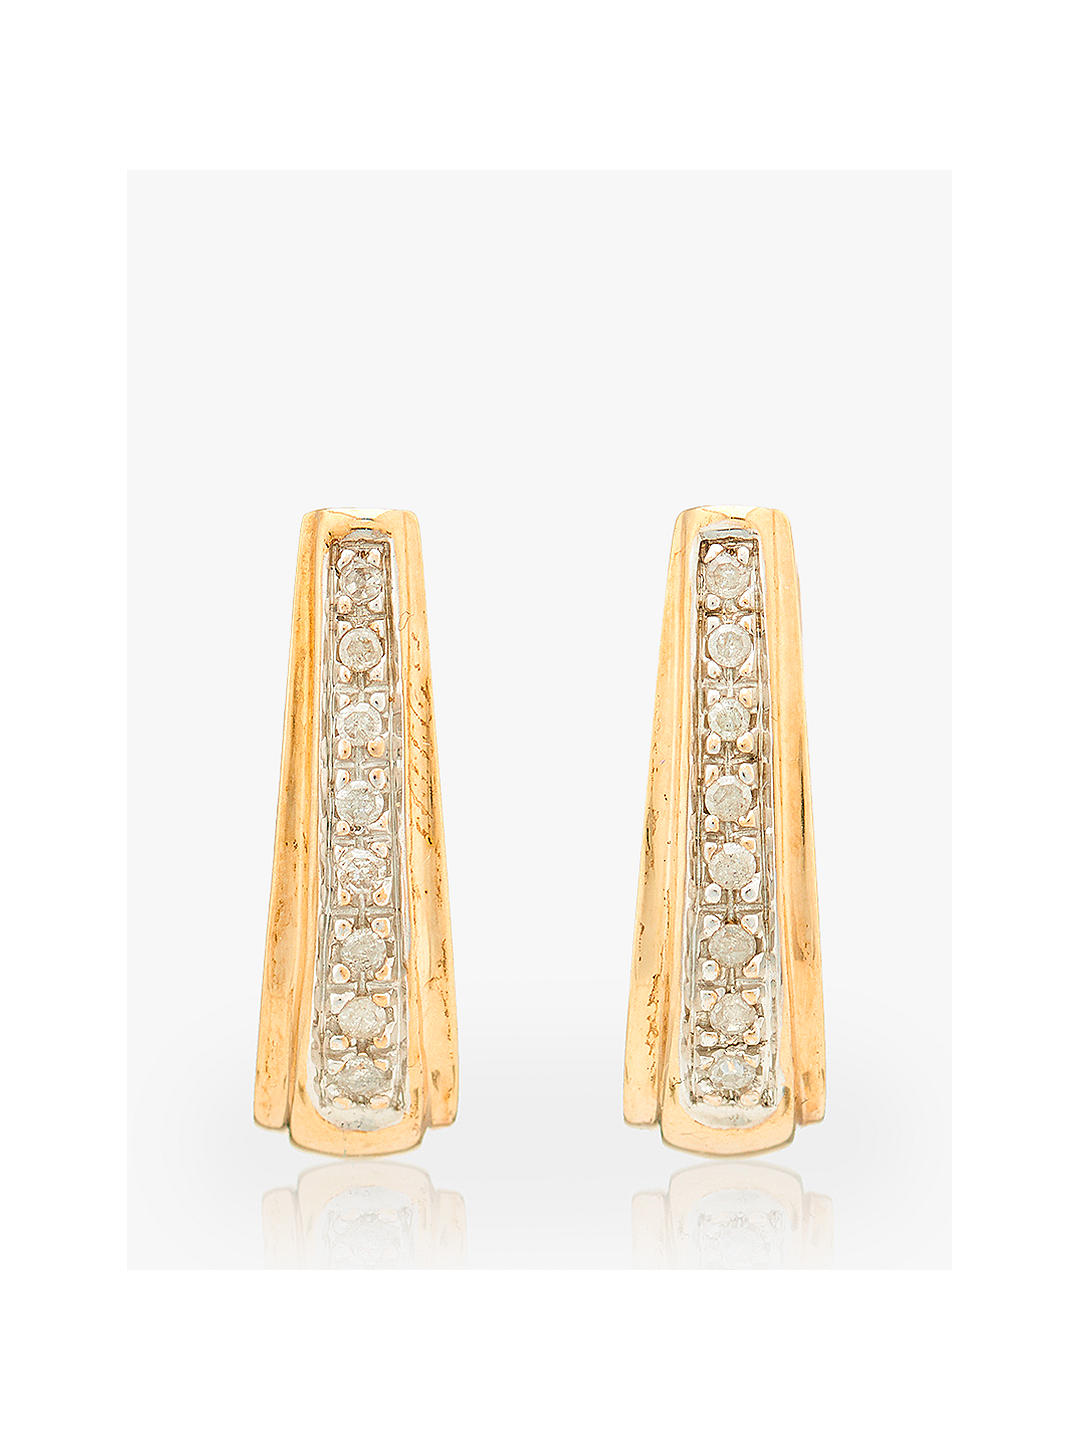 L & T Heirlooms 9ct Yellow Gold Second Hand Diamond Cuff Earrings